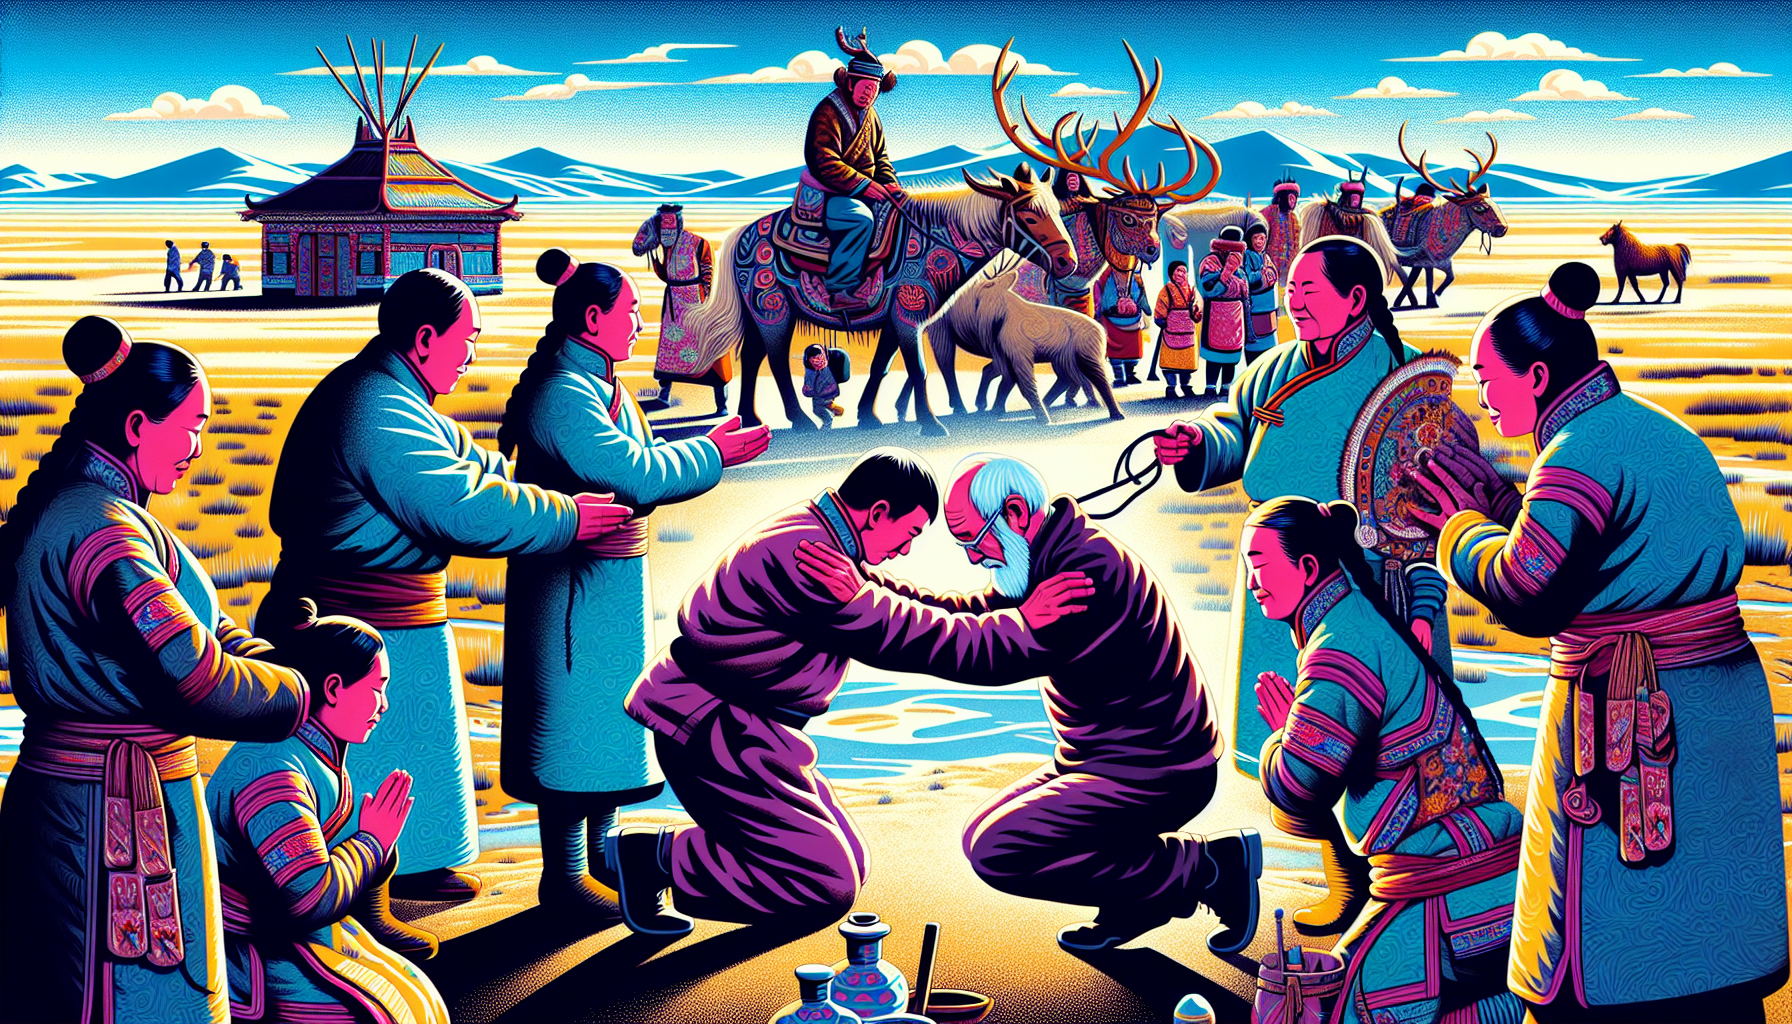 Illustration of travelers respecting local customs in Mongolia